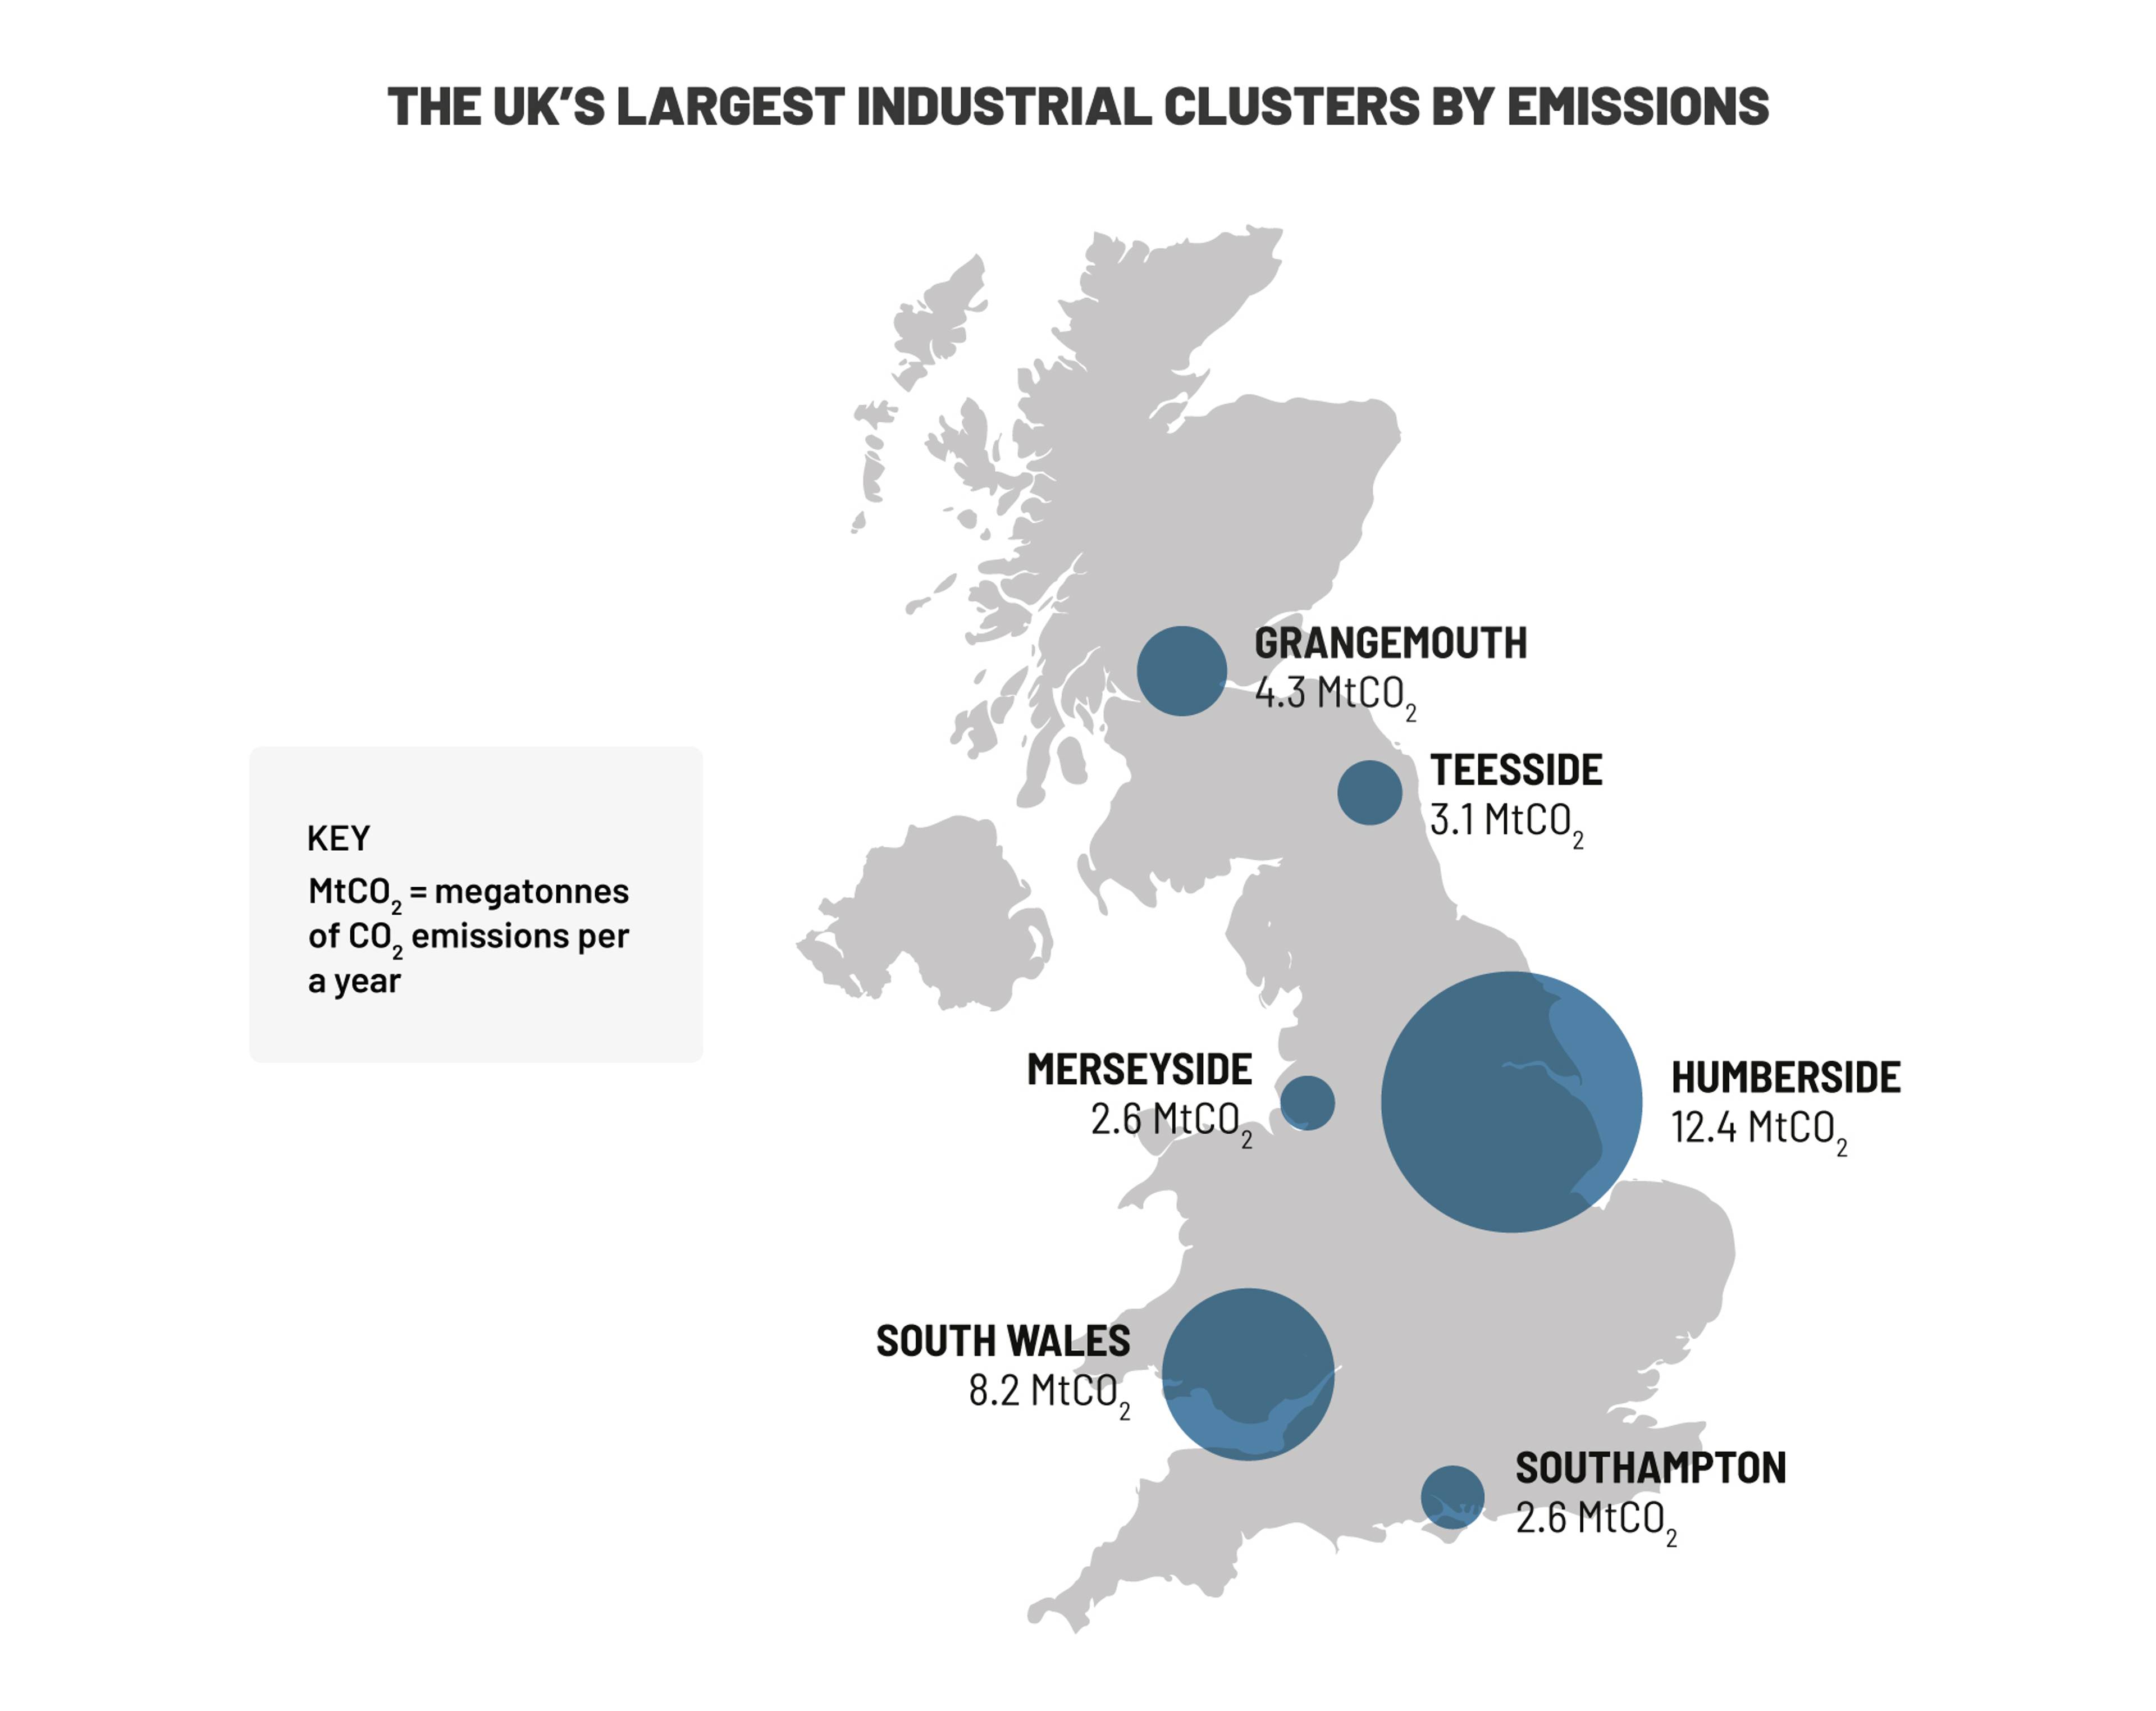 The Humber industrial region emissions